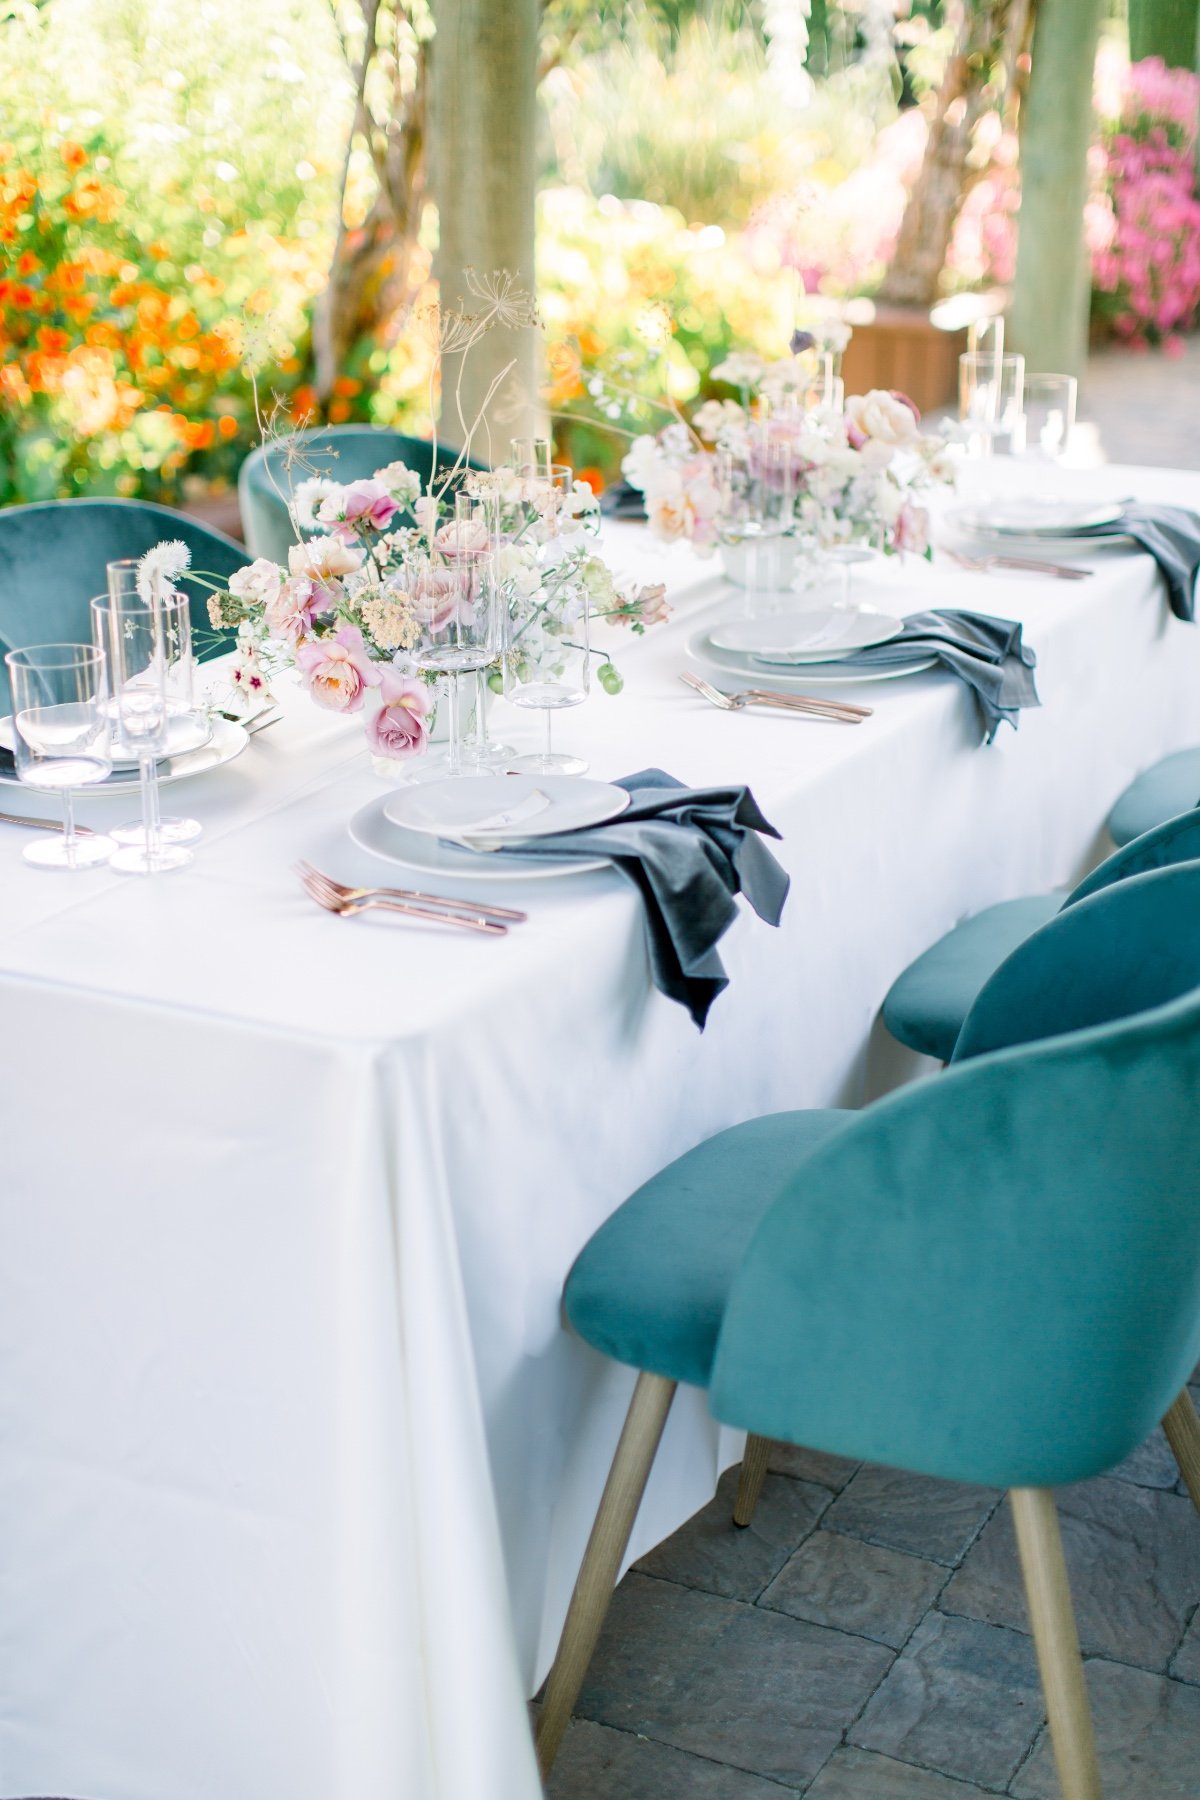 This Micro Wedding Inspiration in California  Is A Breath Of Fresh Air